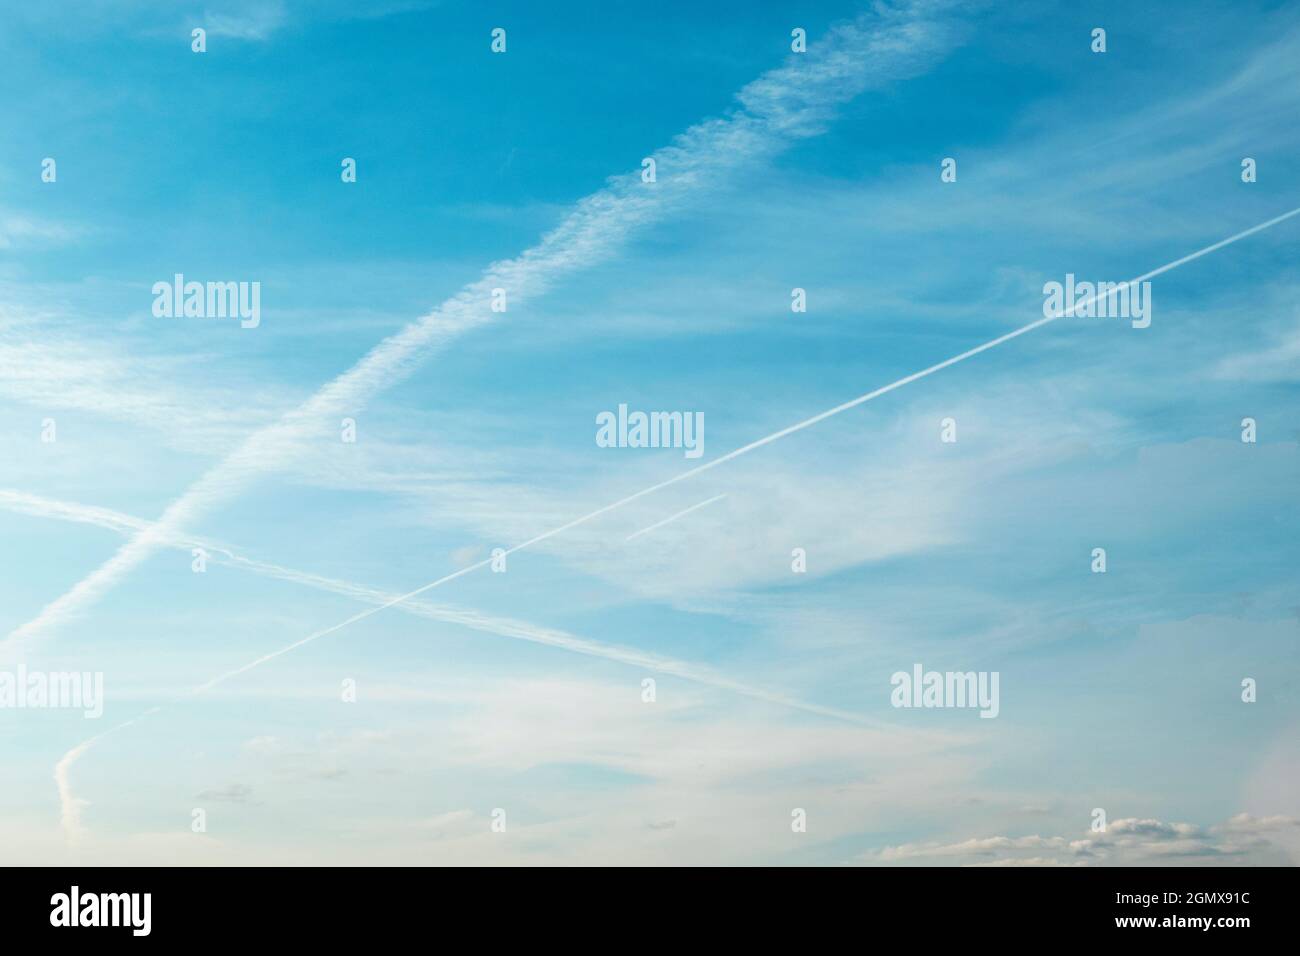 White crisscrossing trails of airplanes, traces of planes on blue sky as background Stock Photo